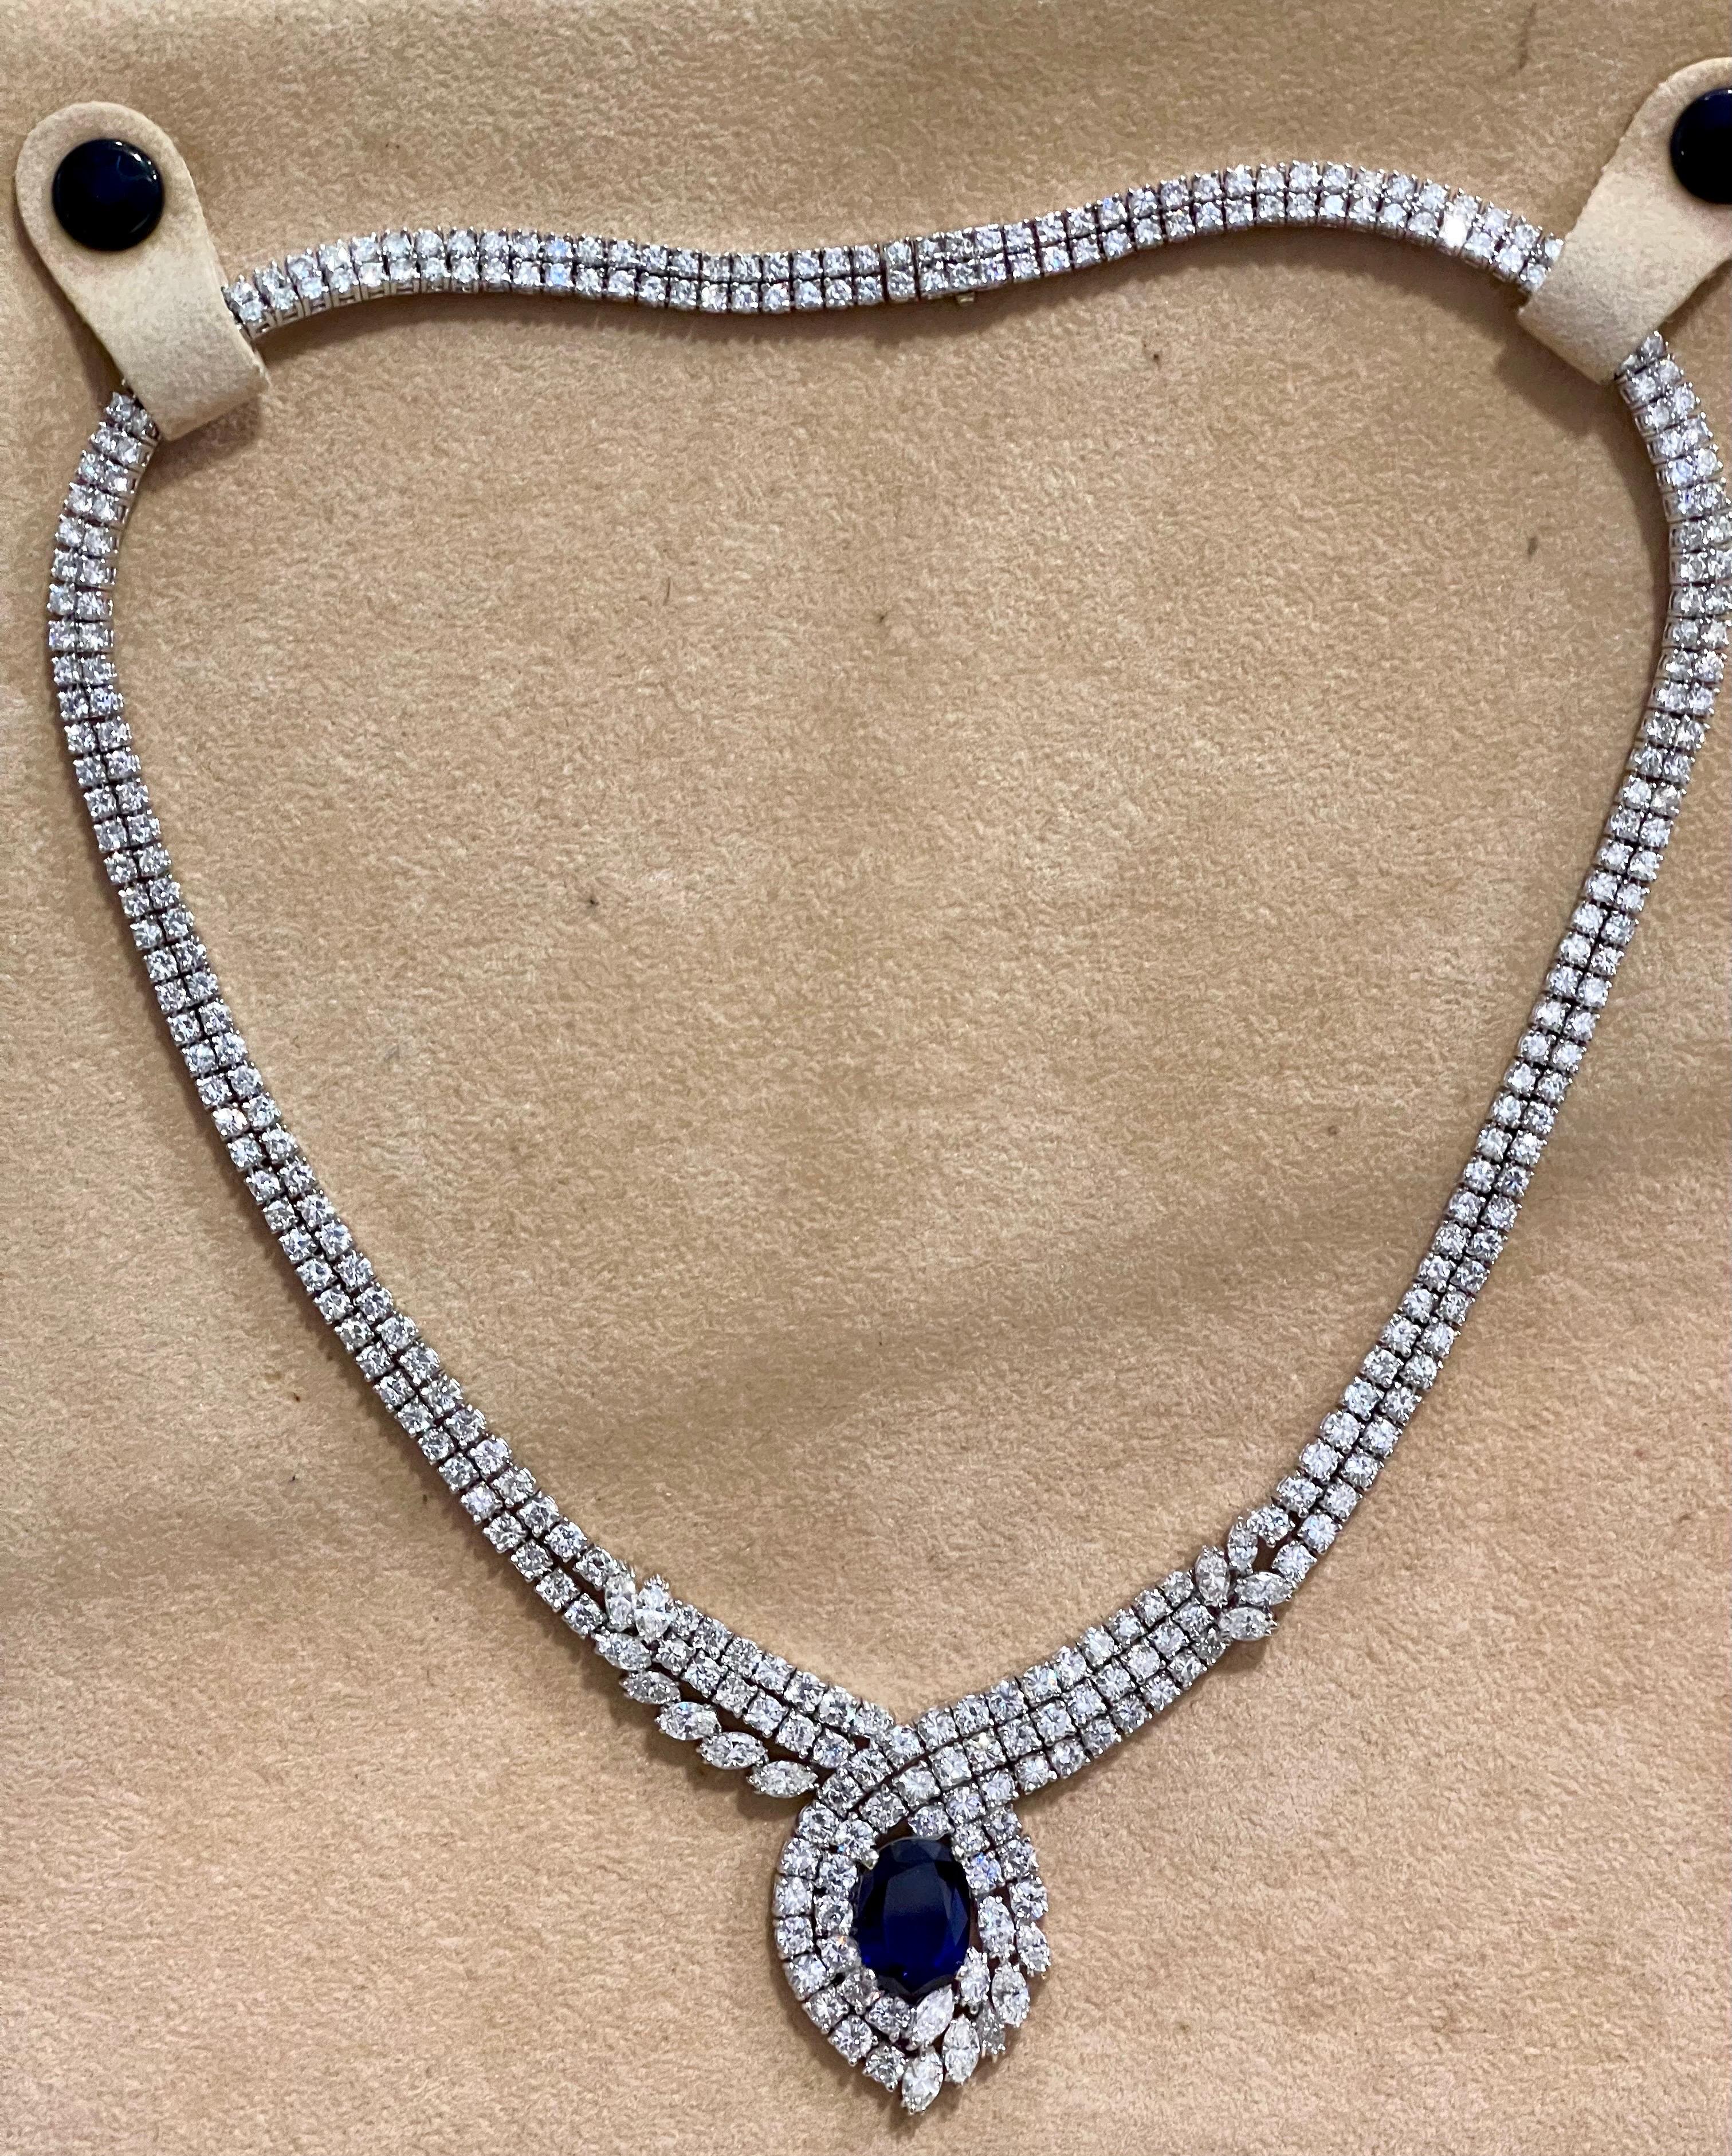 Vintage GIA Certified 6.5Ct Ceylon Sapphire & 32 Ct Diamond Necklace 18K W Gold For Sale 4